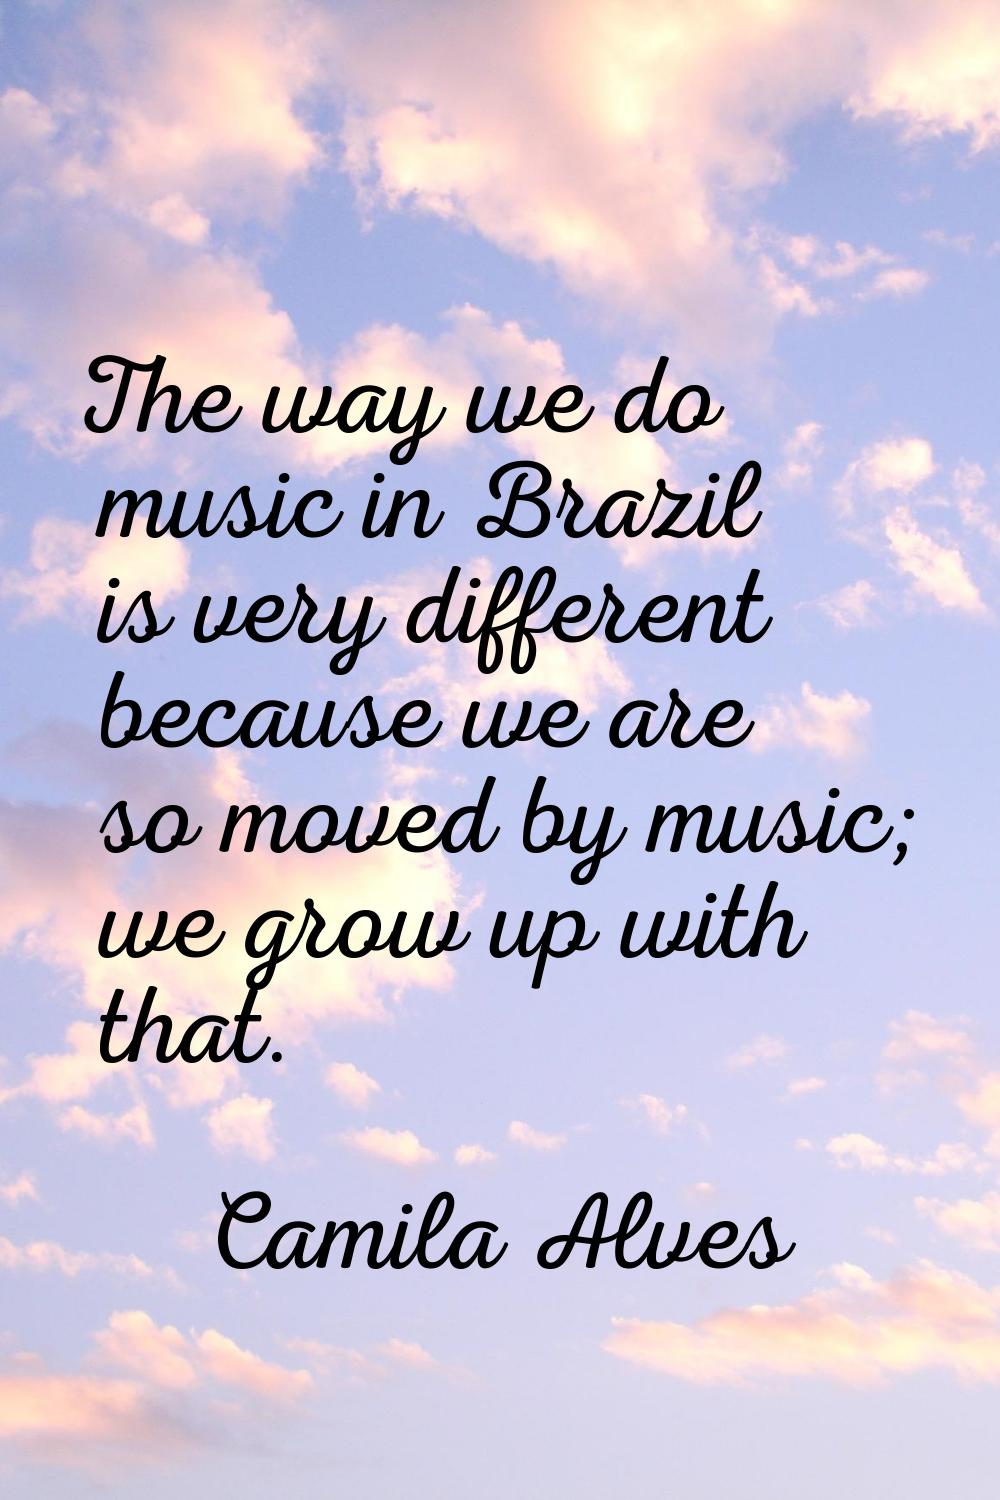 The way we do music in Brazil is very different because we are so moved by music; we grow up with t